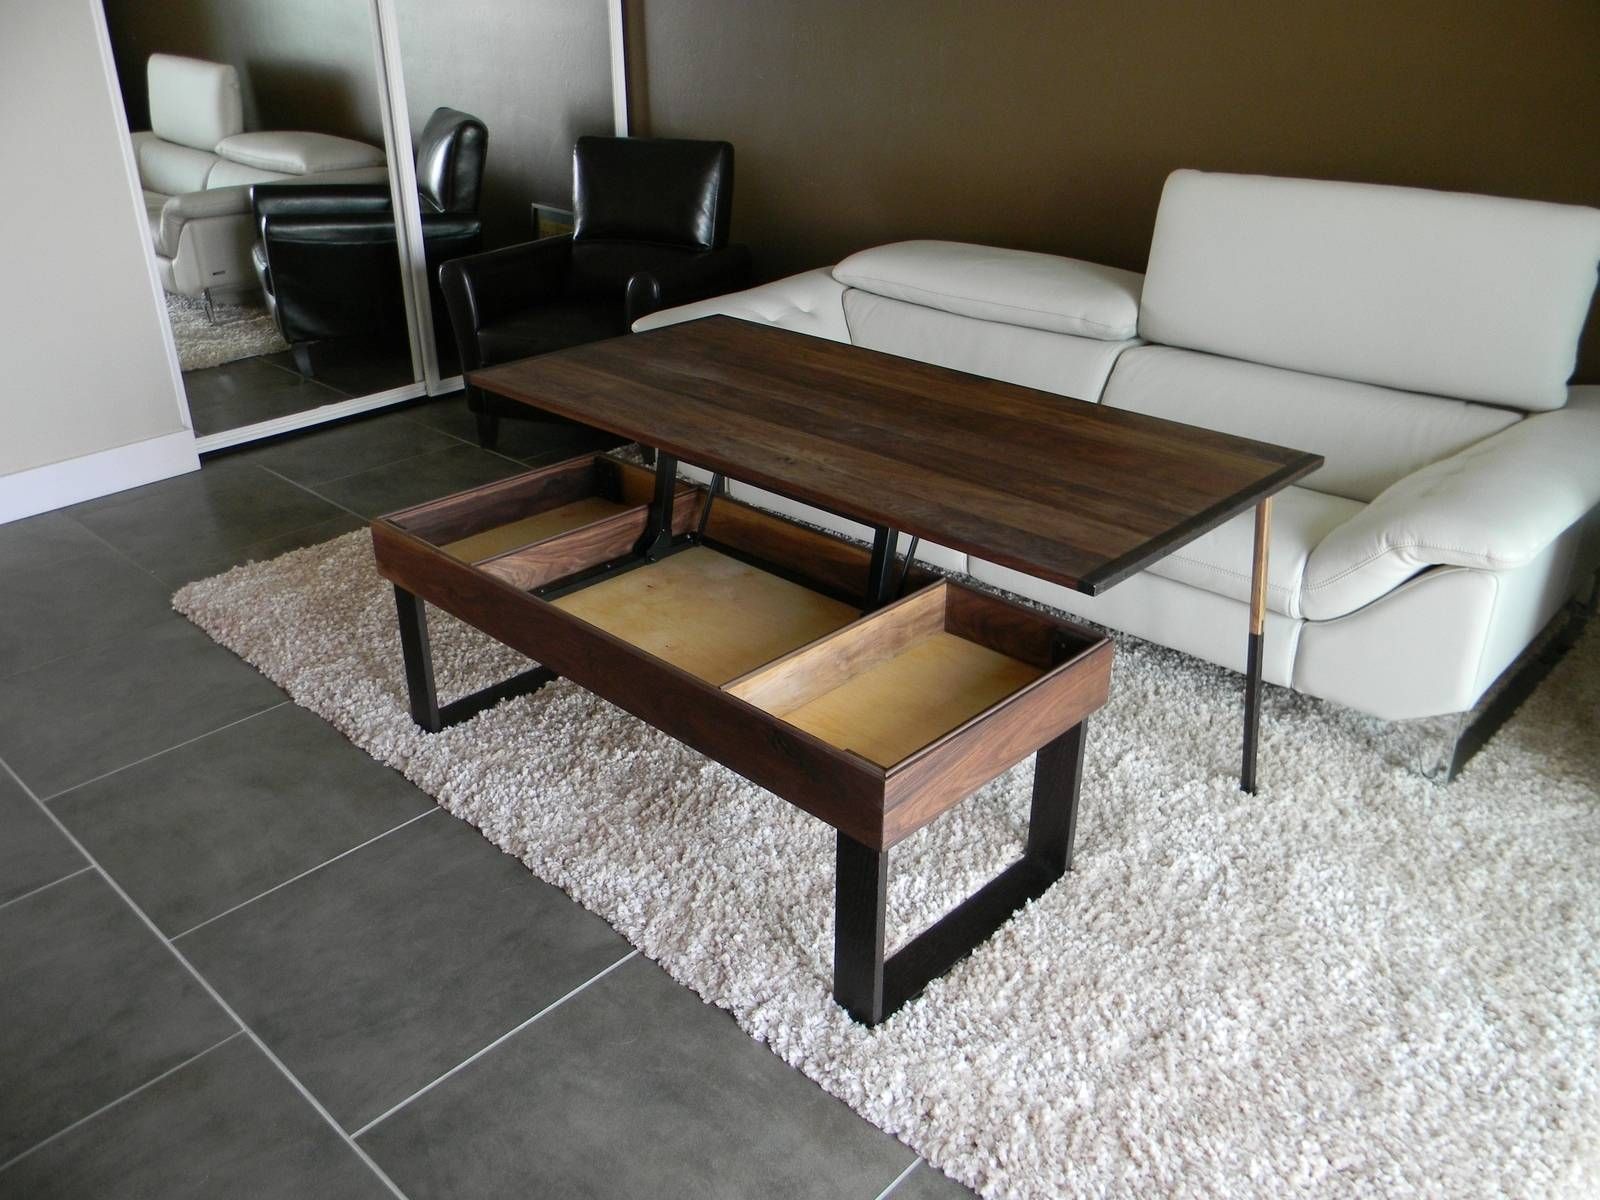 Quality Coffee Table That Lifts Up – Lift Top Coffee Table Amazon For Hinged Top Coffee Tables (View 10 of 30)